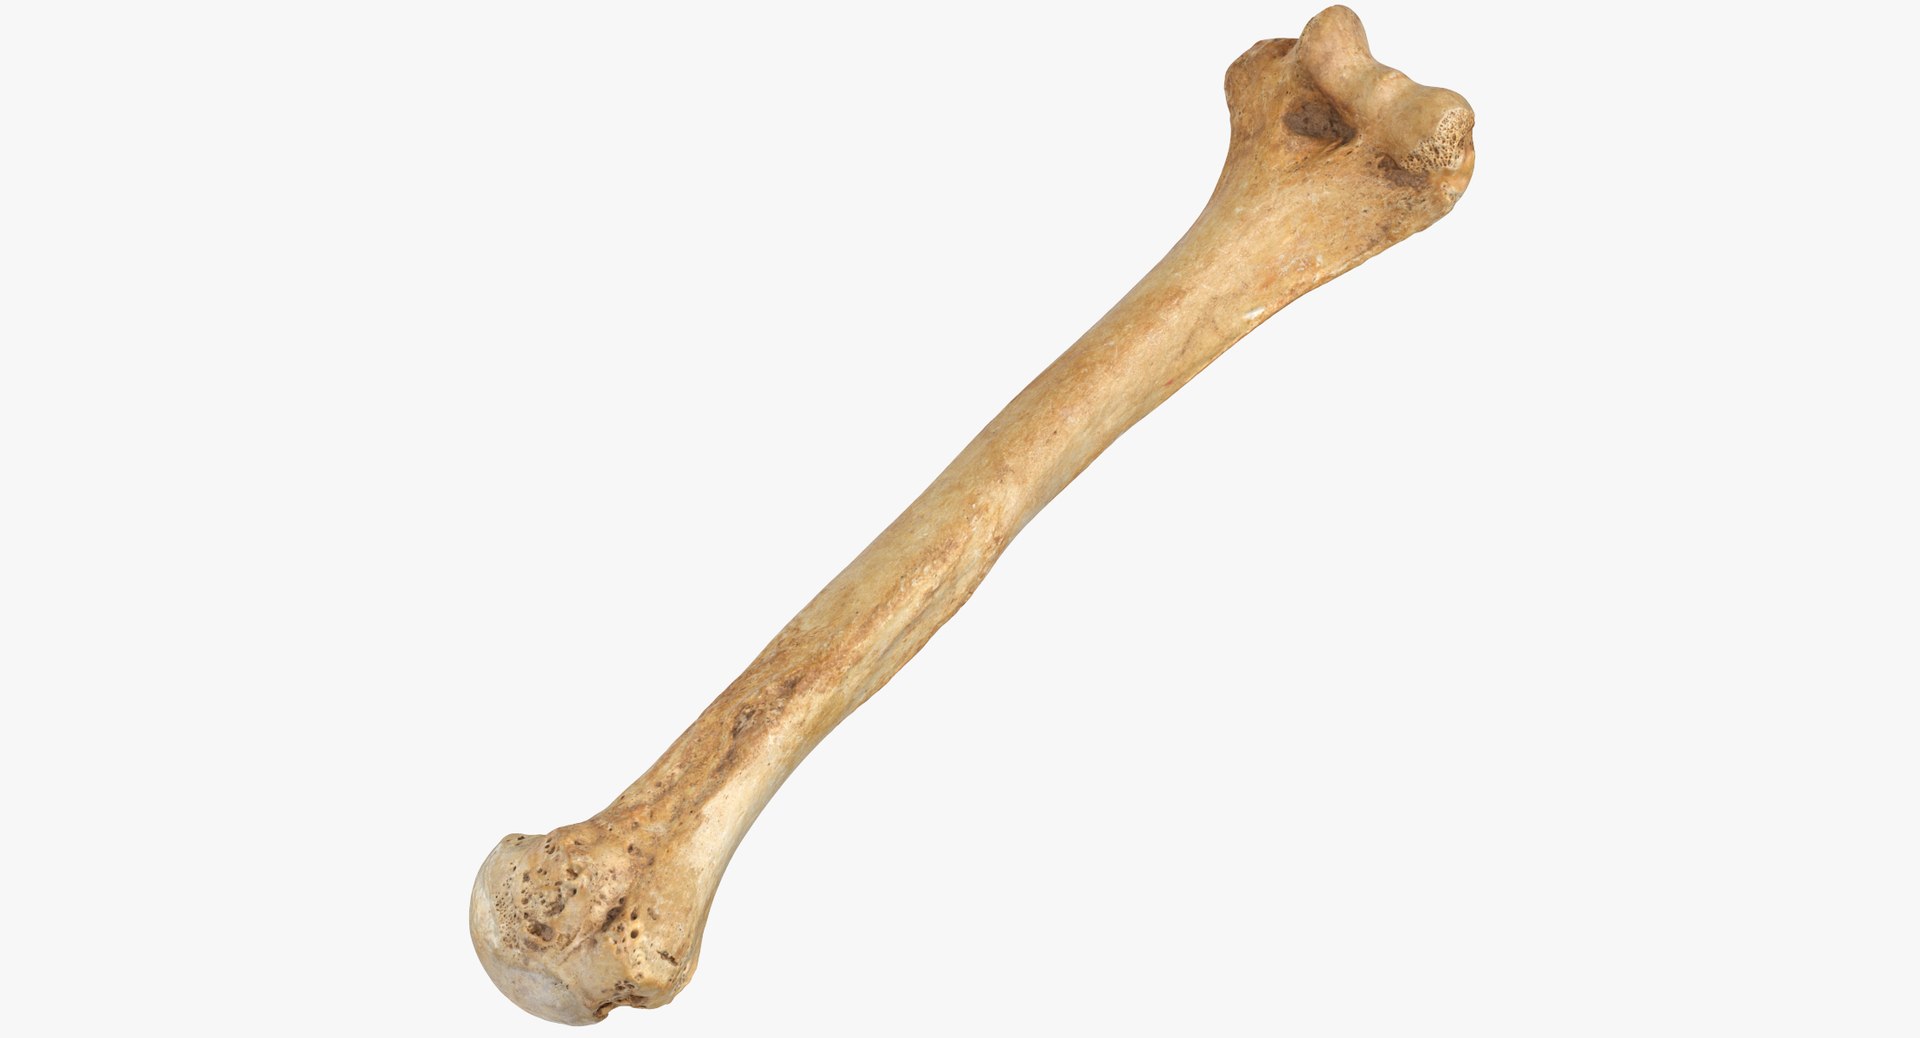 14-facts-about-humerus-bone